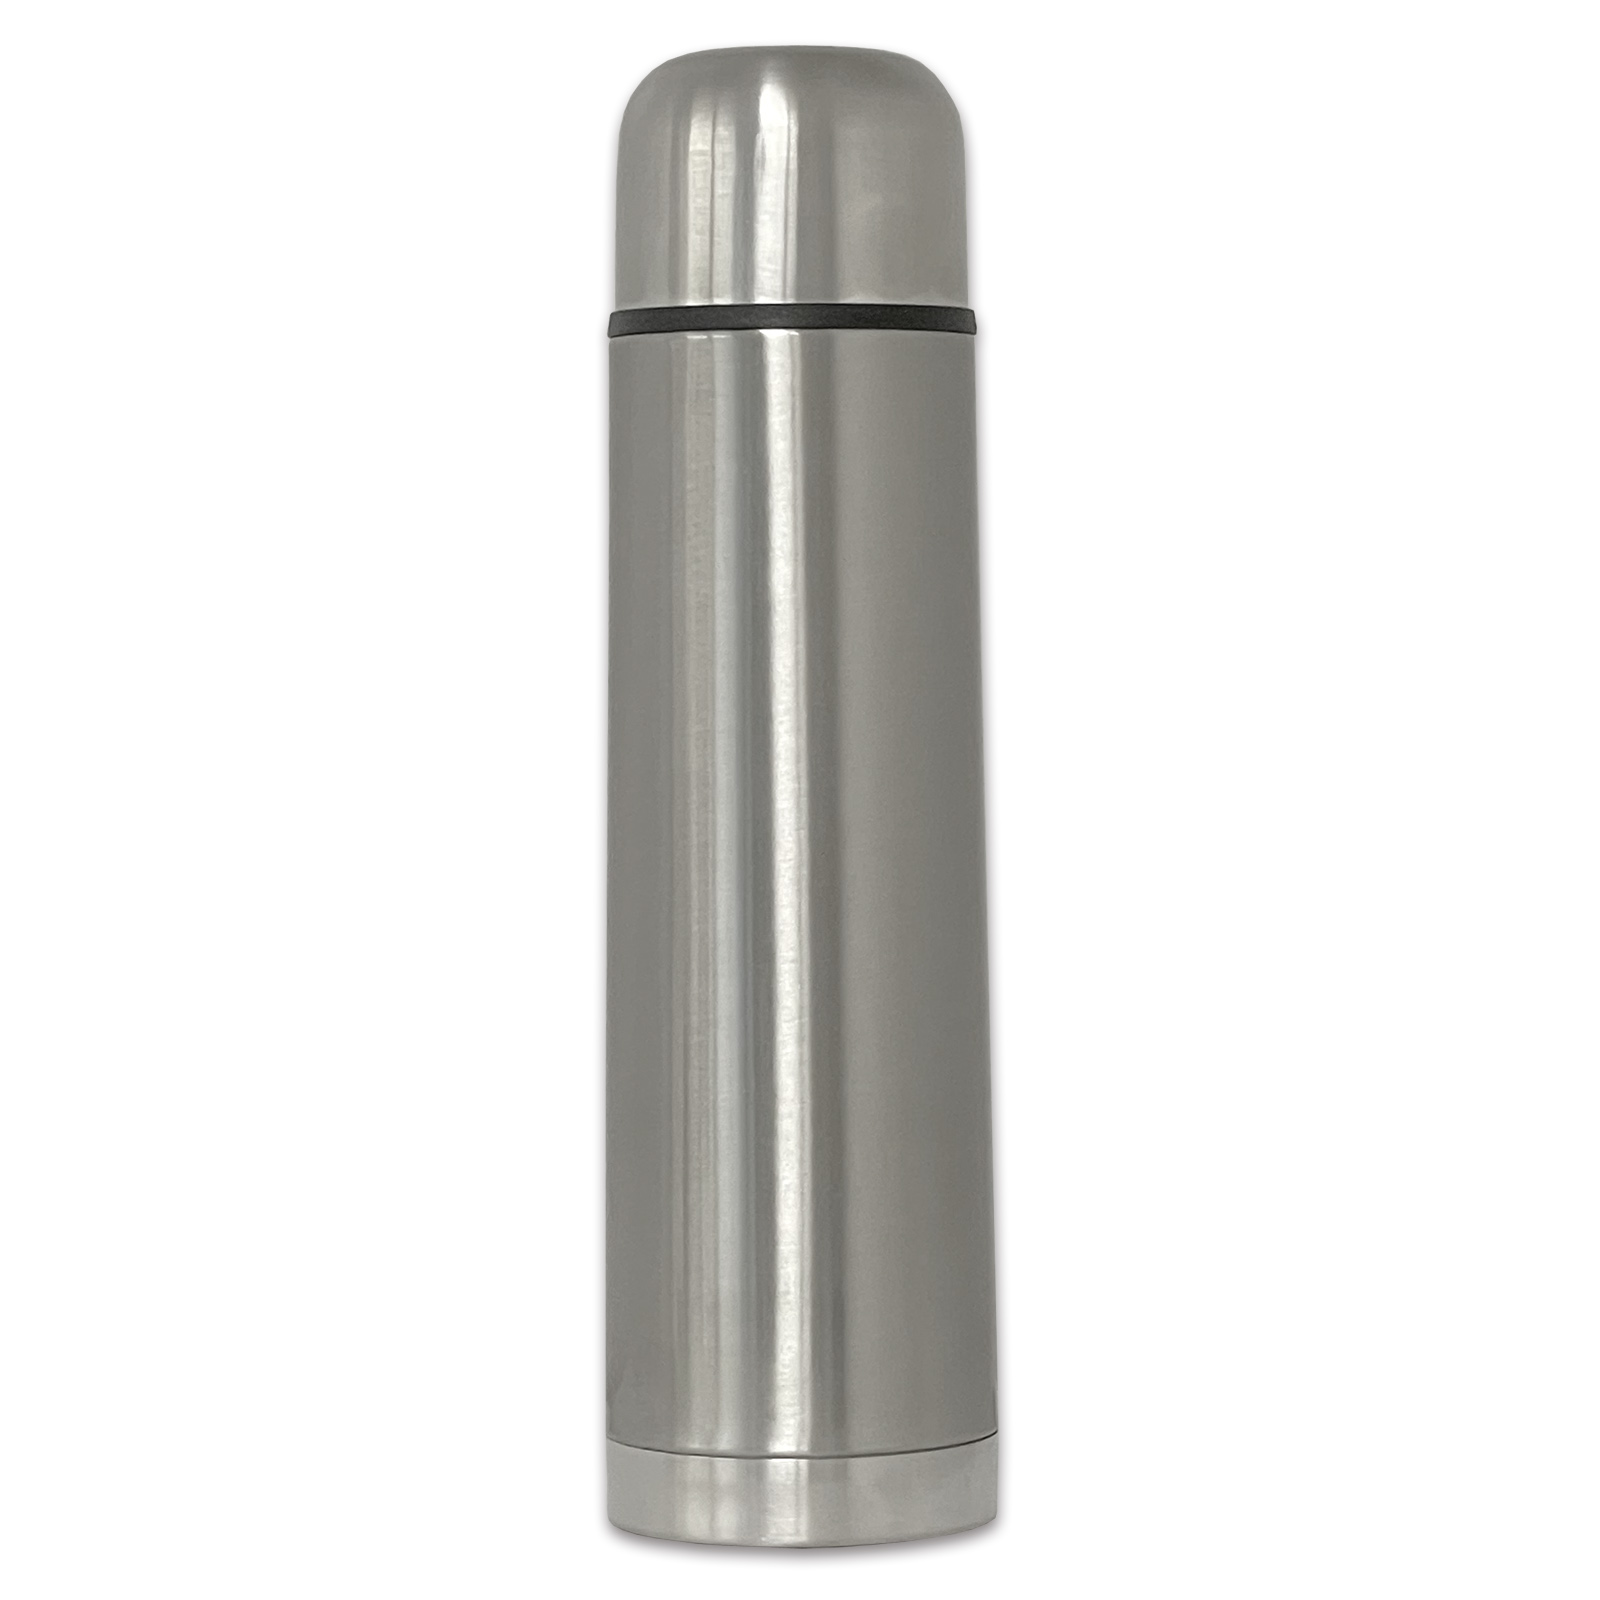 Edelstahl Isolierkanne Isolier Flasche Thermos Kanne Thermo Trinkflasche 0,5-1 L 